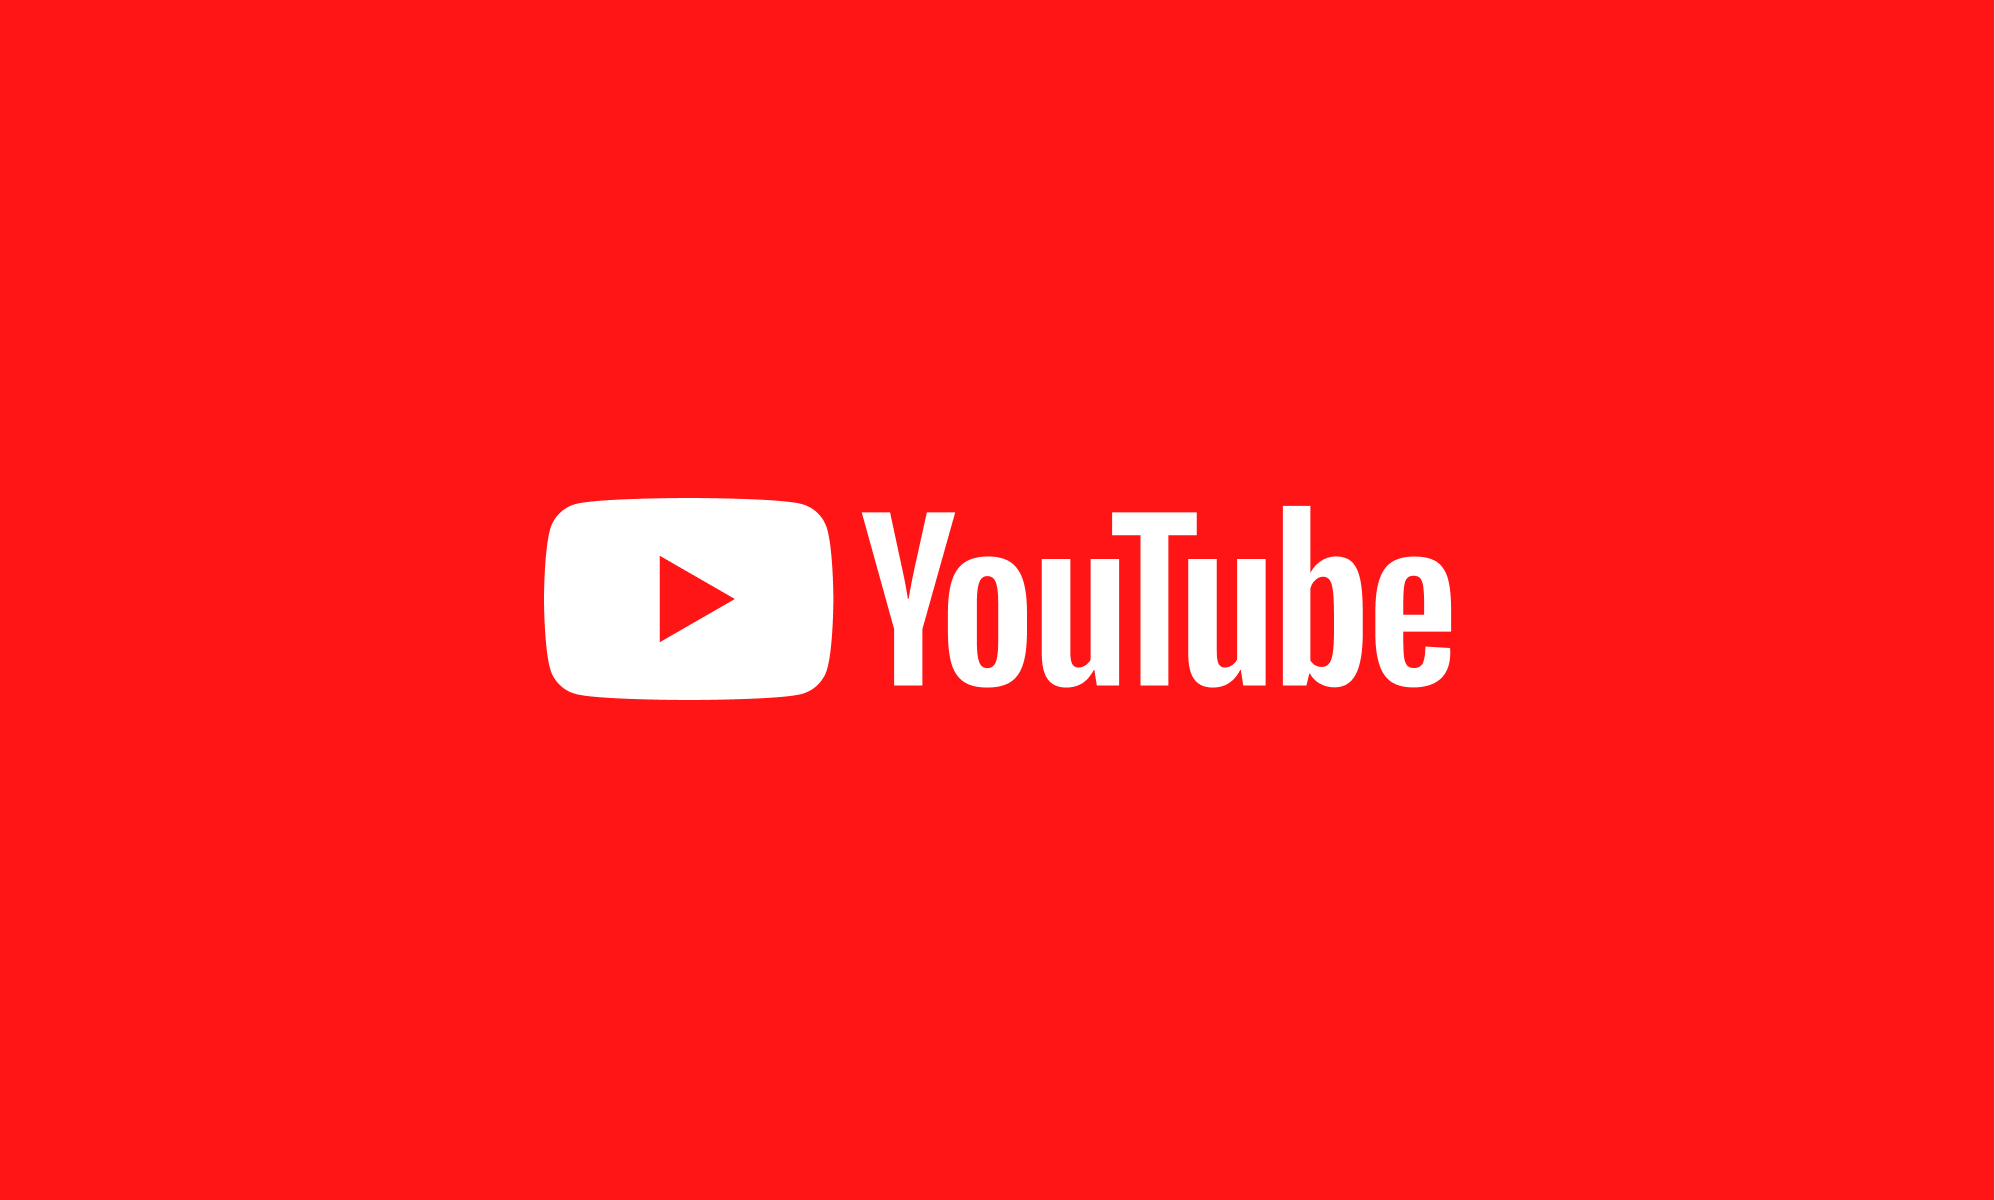 A white YouTube logo on a bold red background